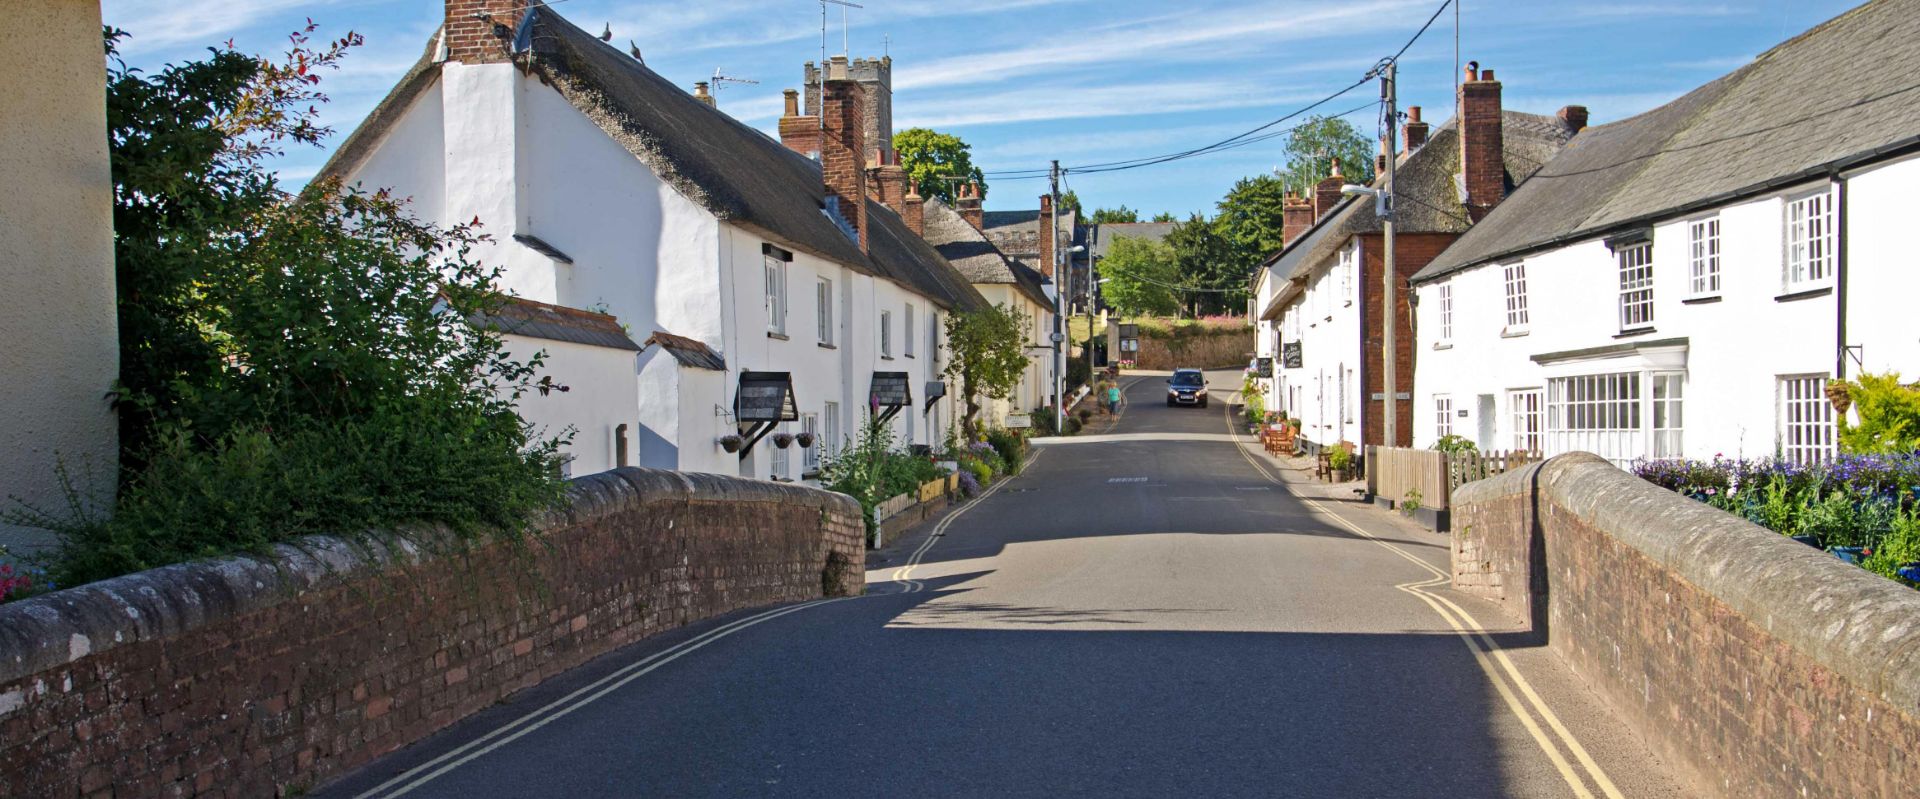 The main street in East Budleigh